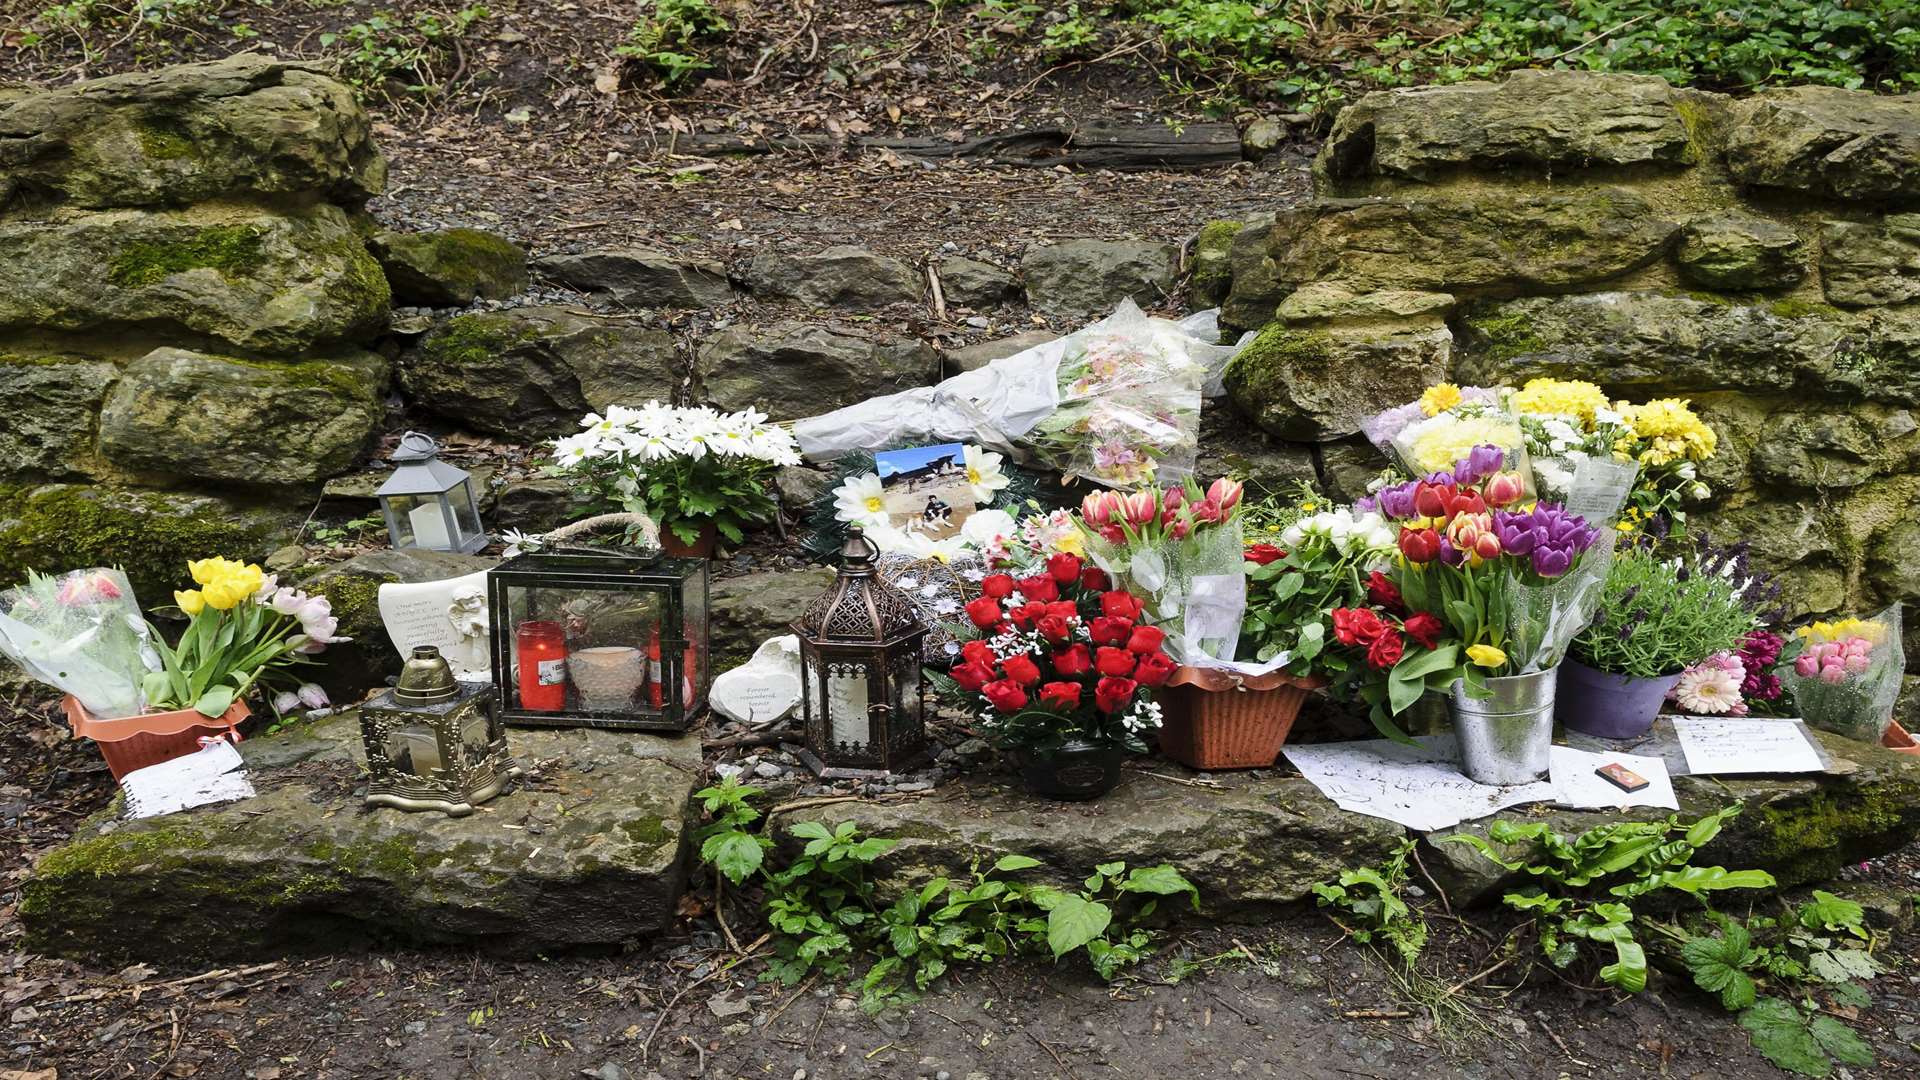 Flowers, lanterns and other items were left in tribute to 21-year-old Razvan Sirbu